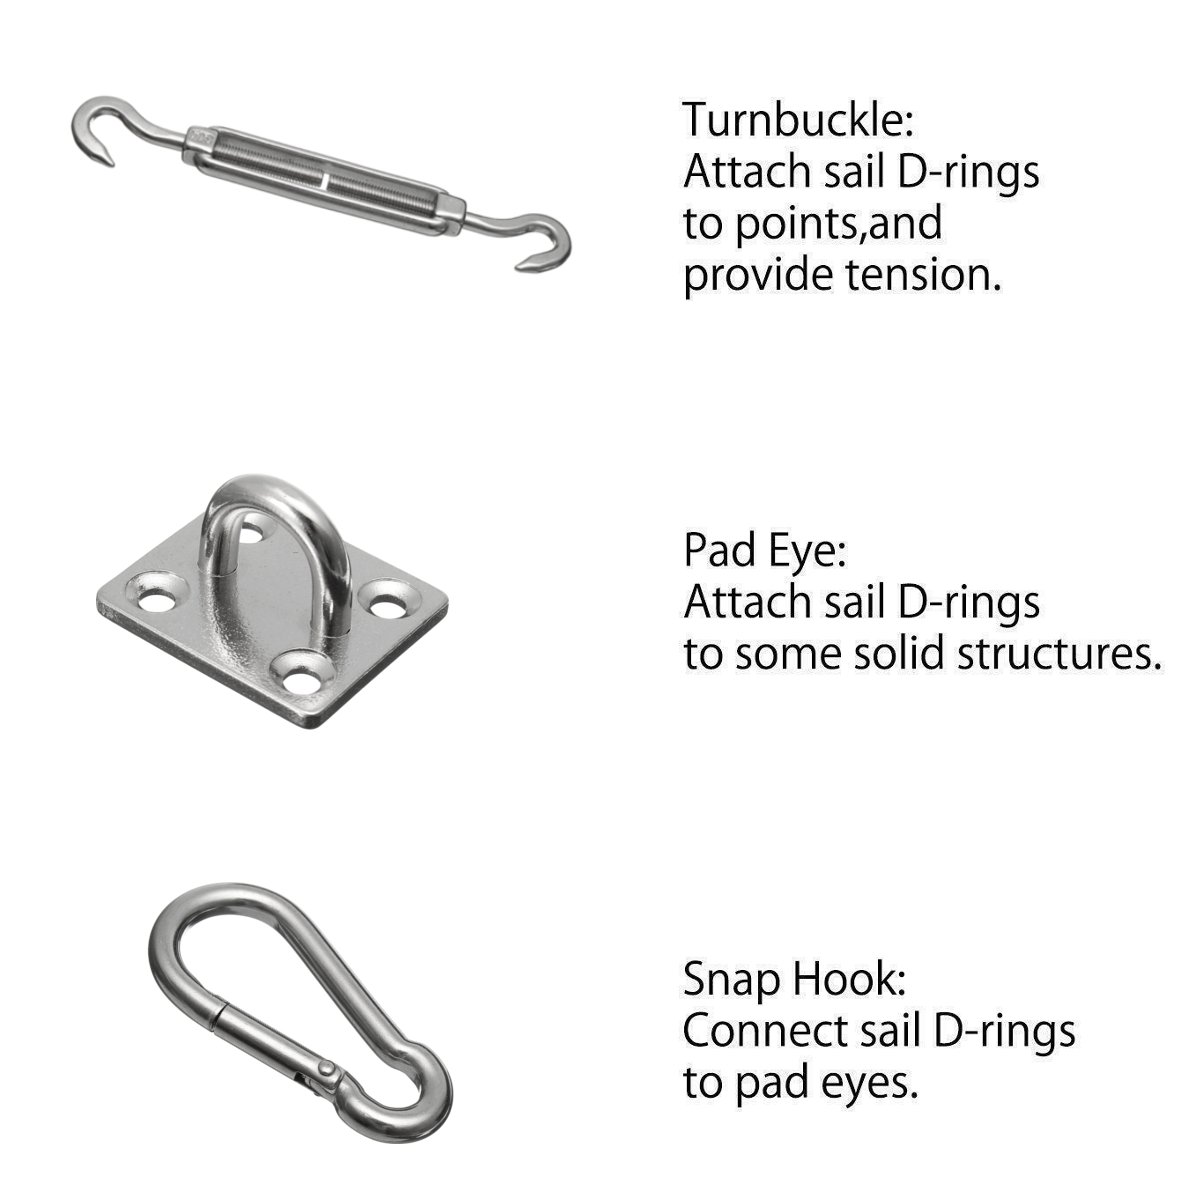 Mounting-Screw-Stainless-Steel-Sun-Sail-Shade-Canopy-Fixing-Fittings-Hardware-Accessory-Kit-1564445